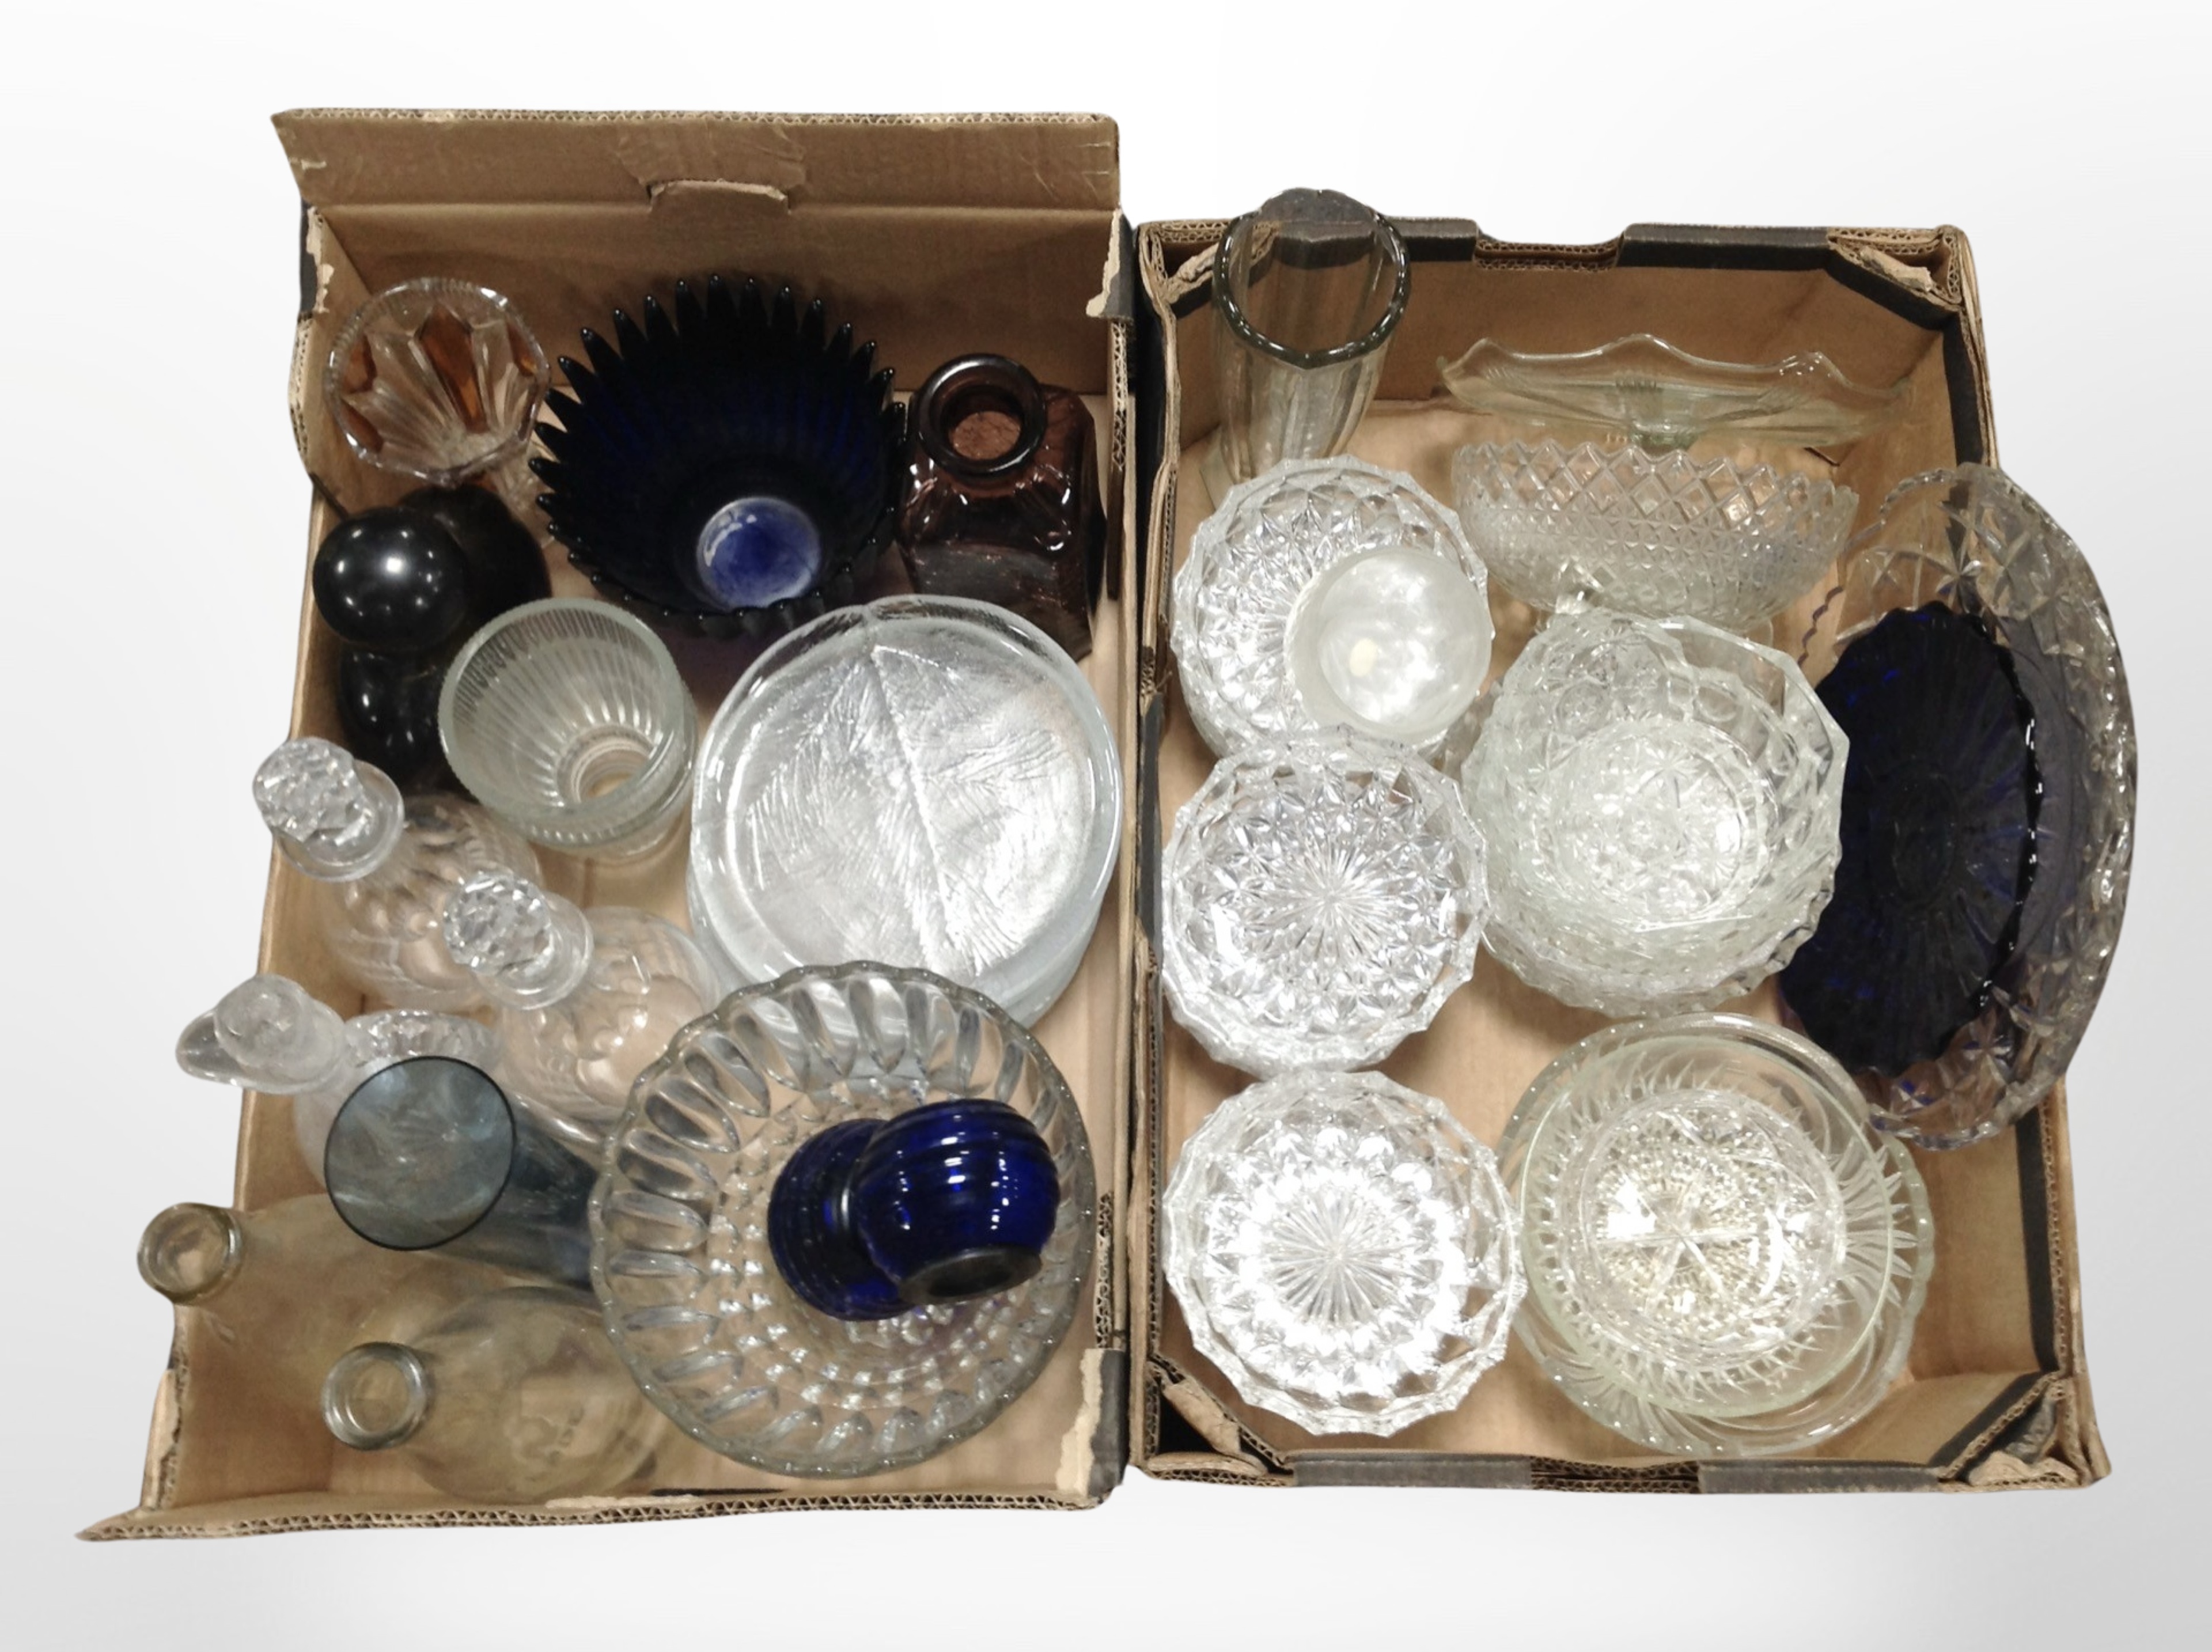 Two boxes of 20th-century continental glasswares including bowls, decanters, vases, etc.